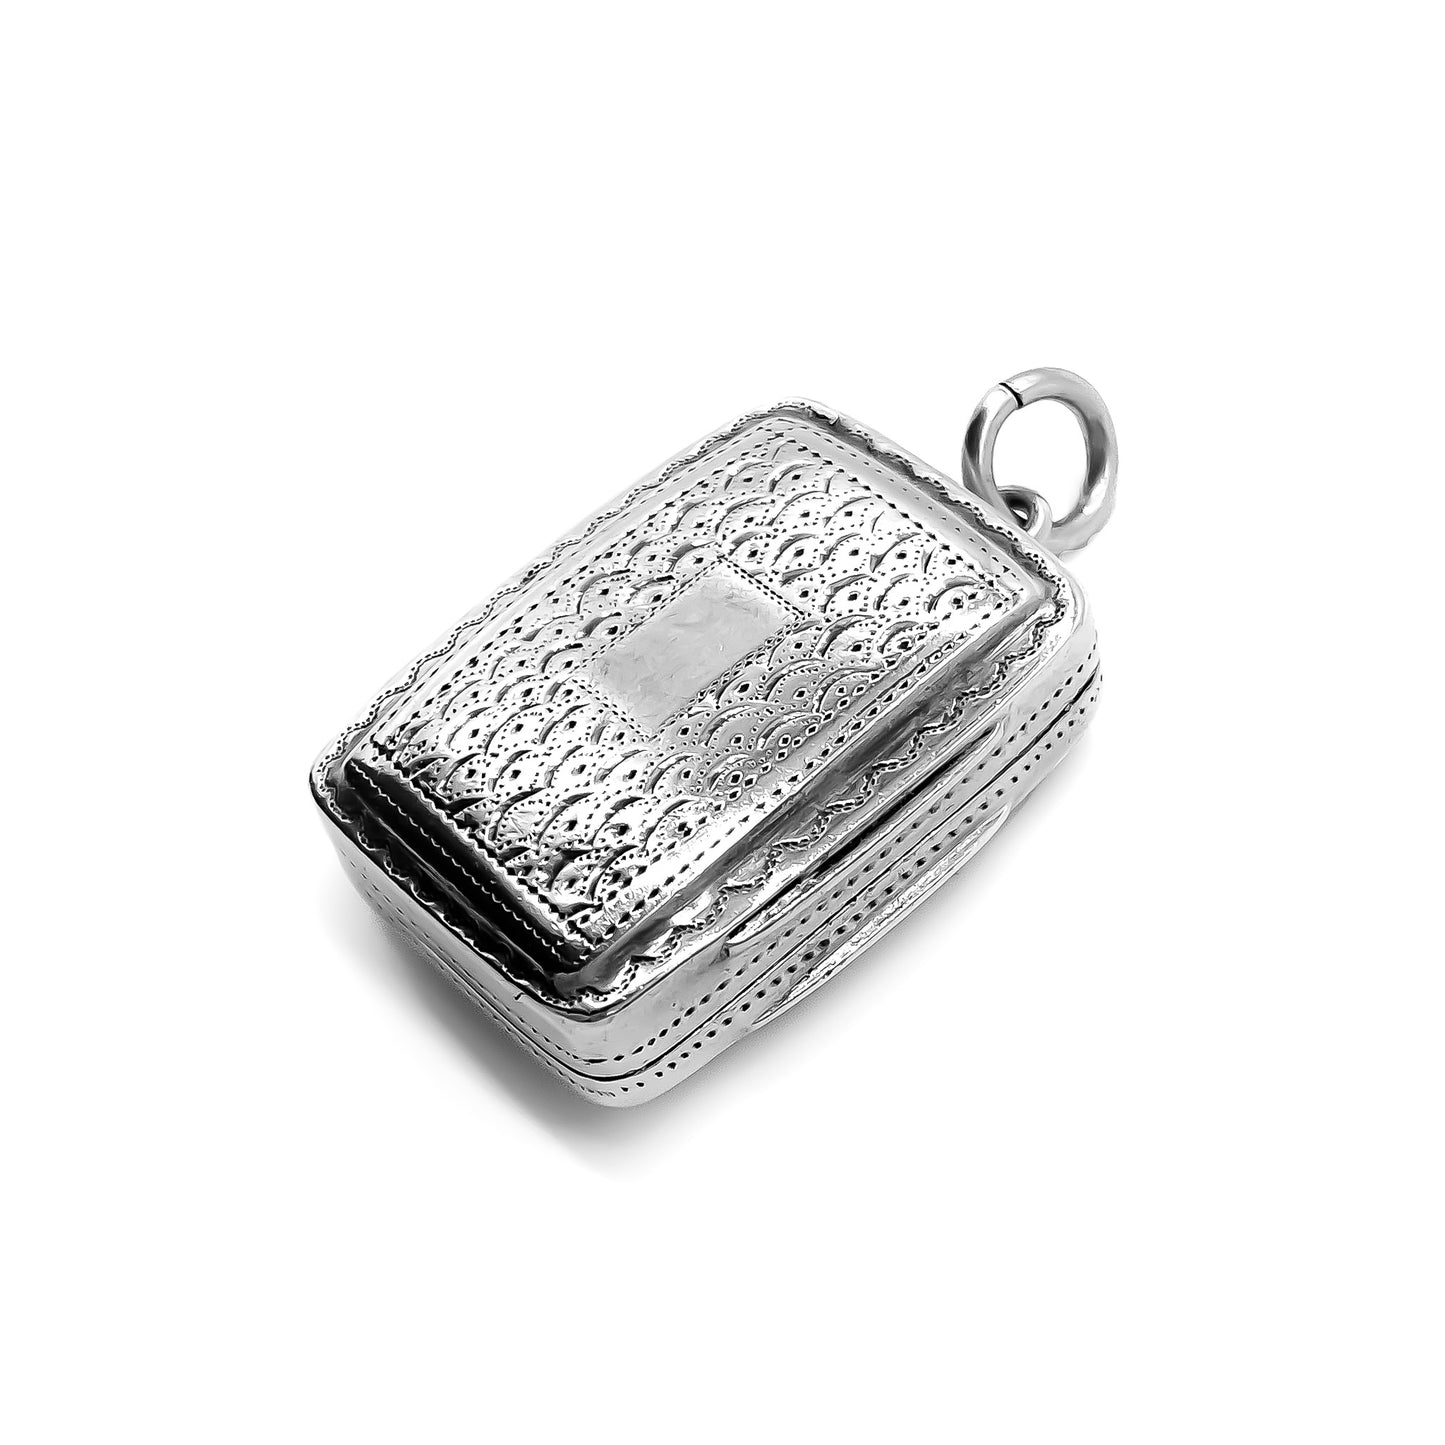 Lovely sterling silver Georgian vinaigrette, ideal to be worn as a pendant.